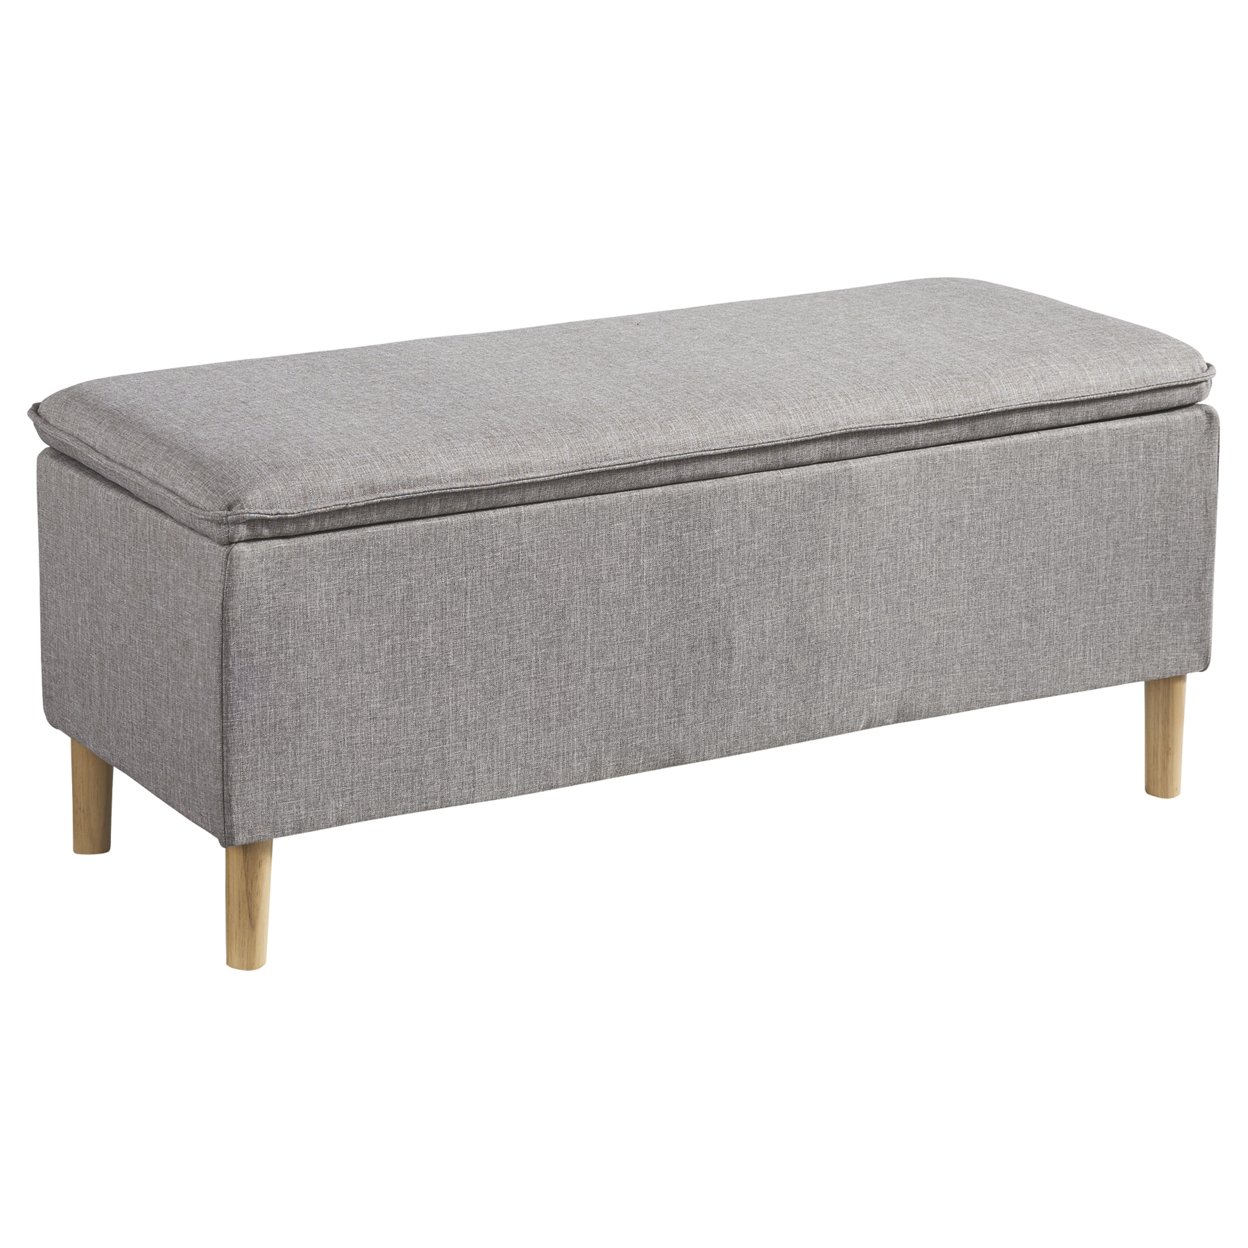 Saltoro Sherpi Fabric Upholstered Wooden Accent Bench with Hidden Storage, Gray and Brown